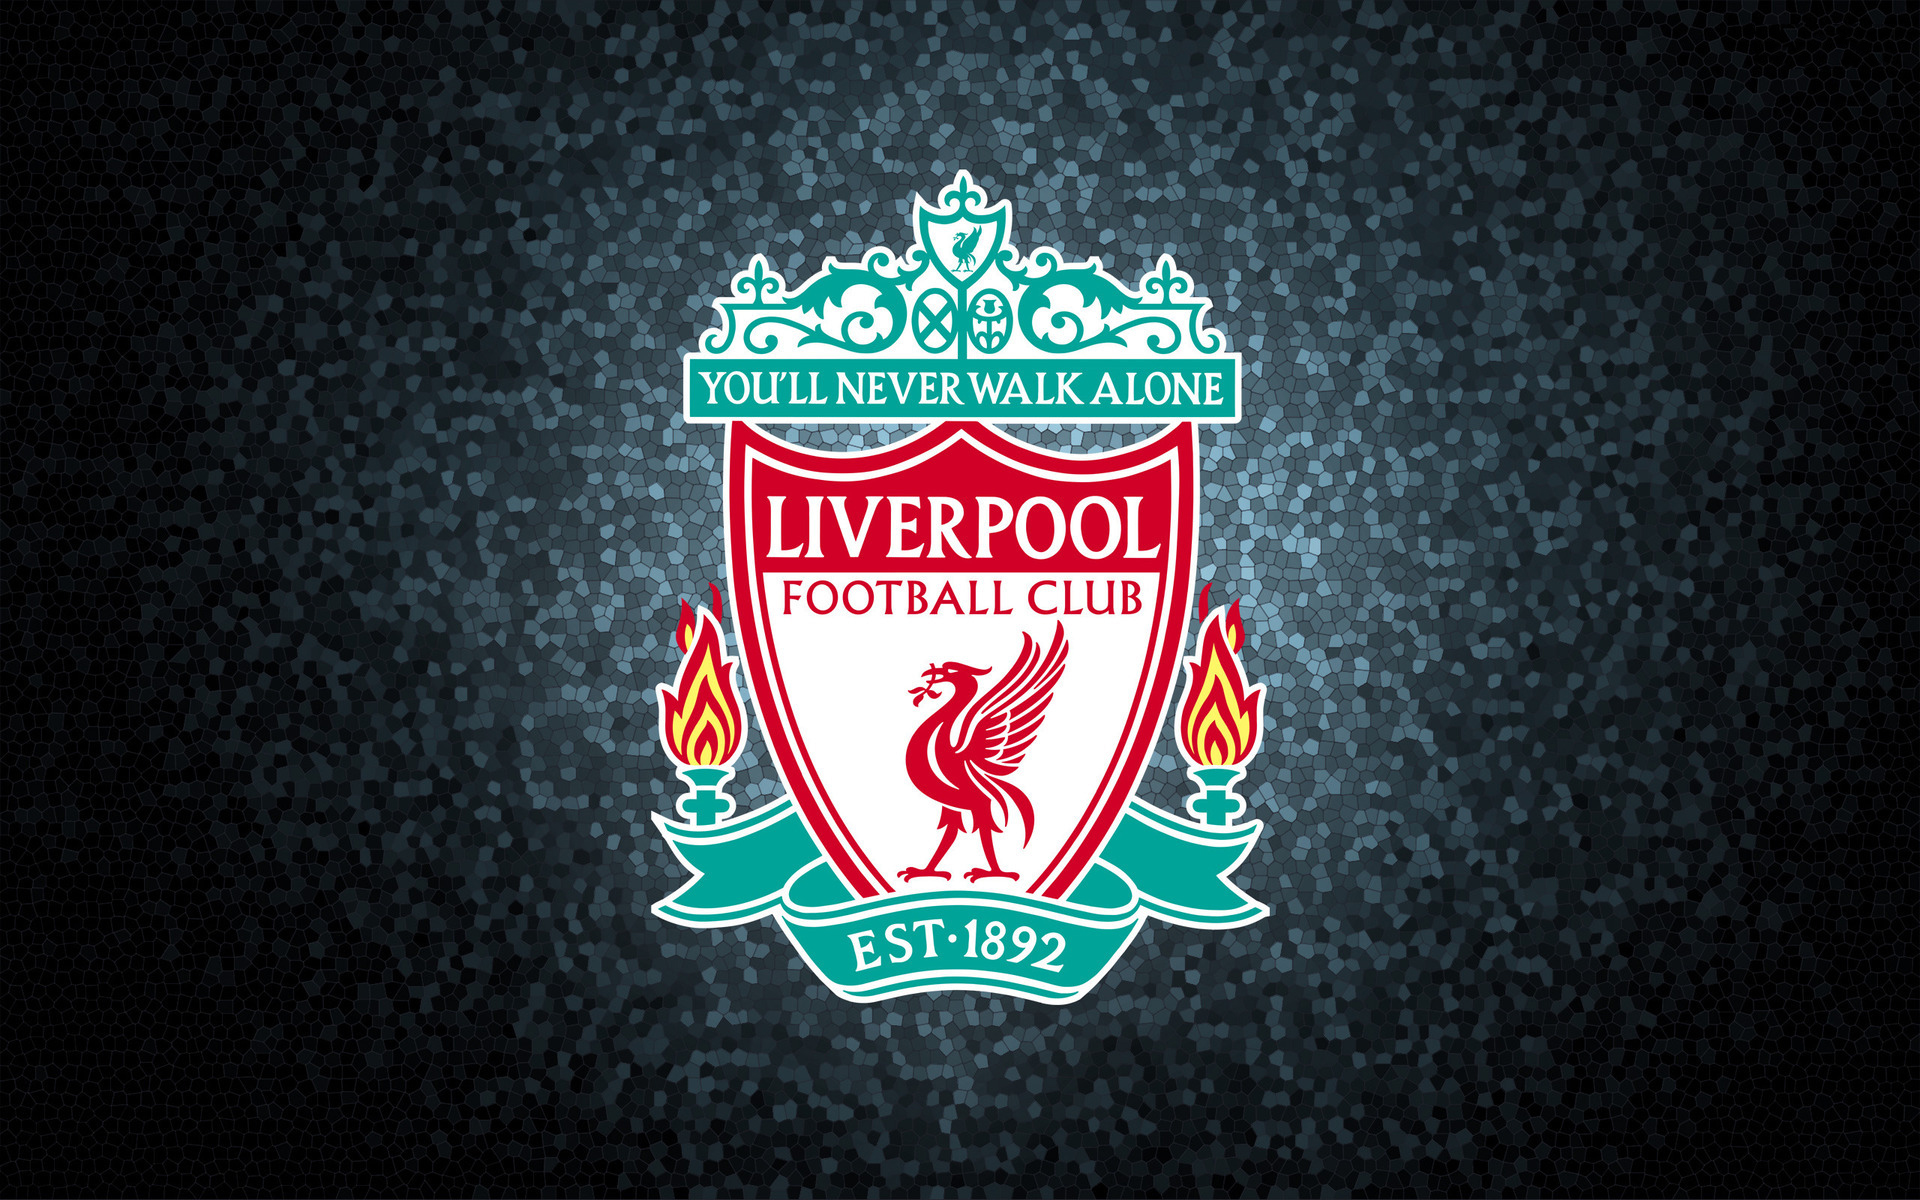 Liverpool Football Club High Quality In HD Wallpaper For Your PC Dektop